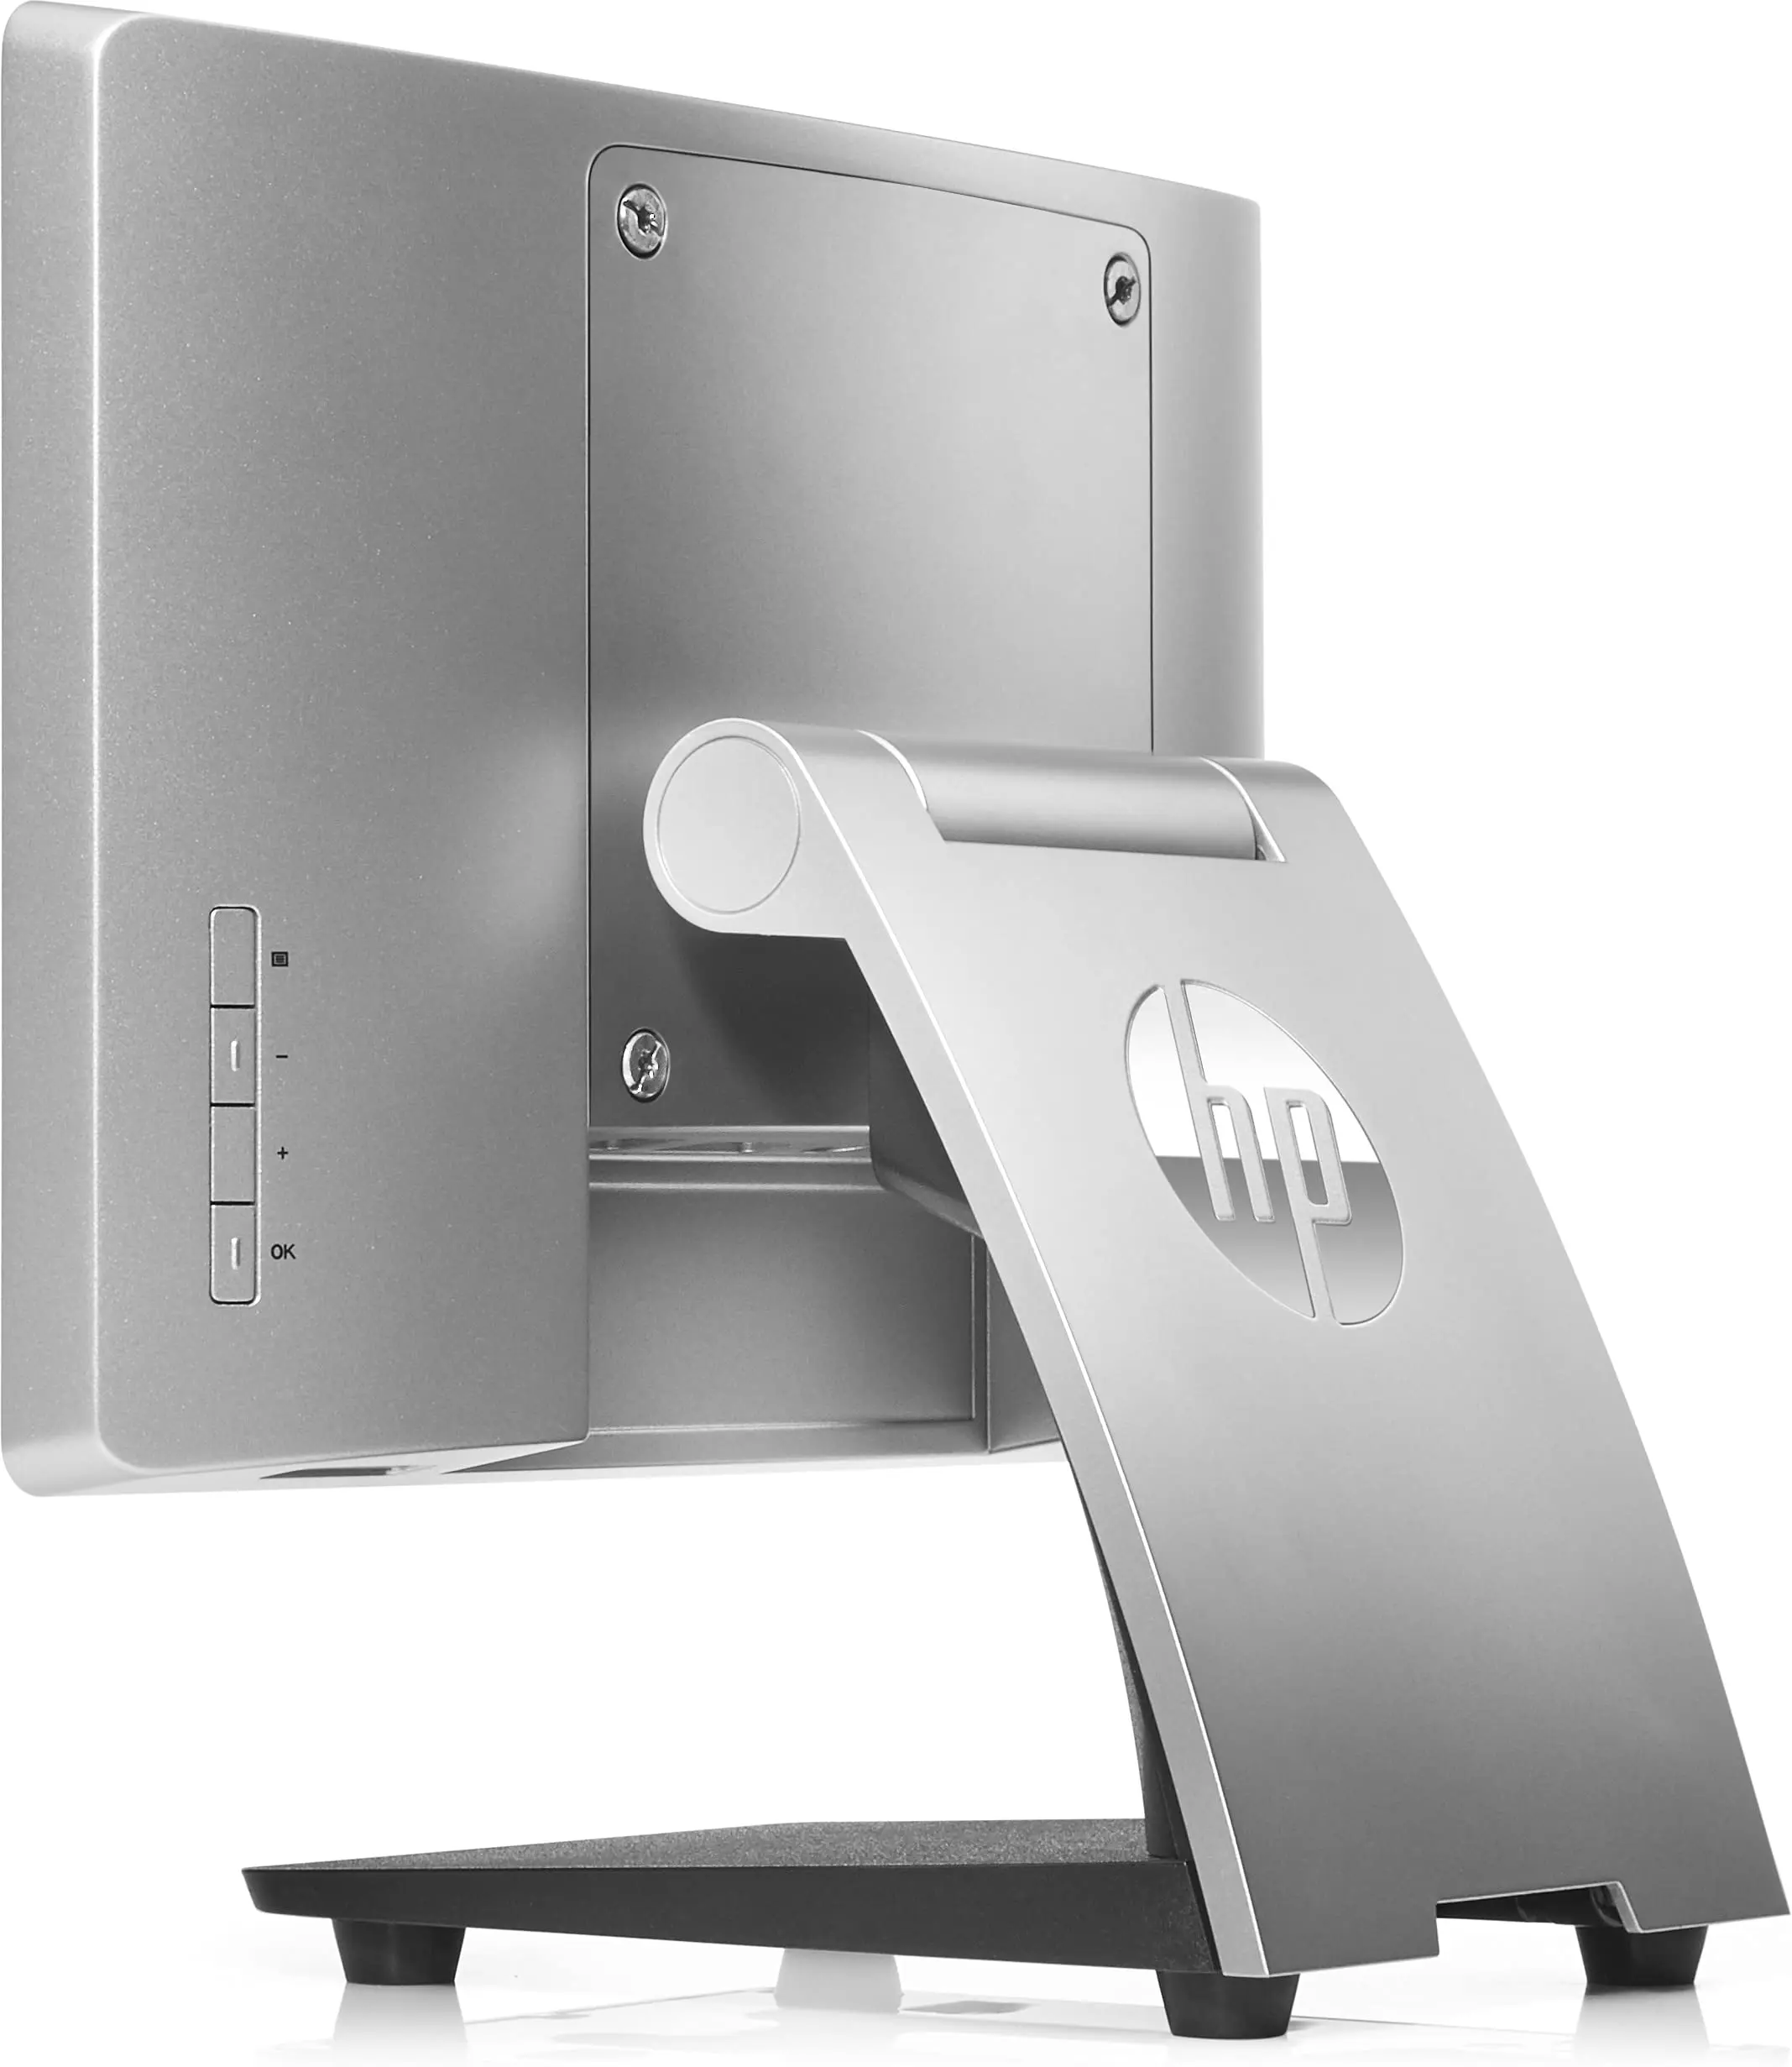 hewlett packard monitor stands - Can you put HP monitor on stand